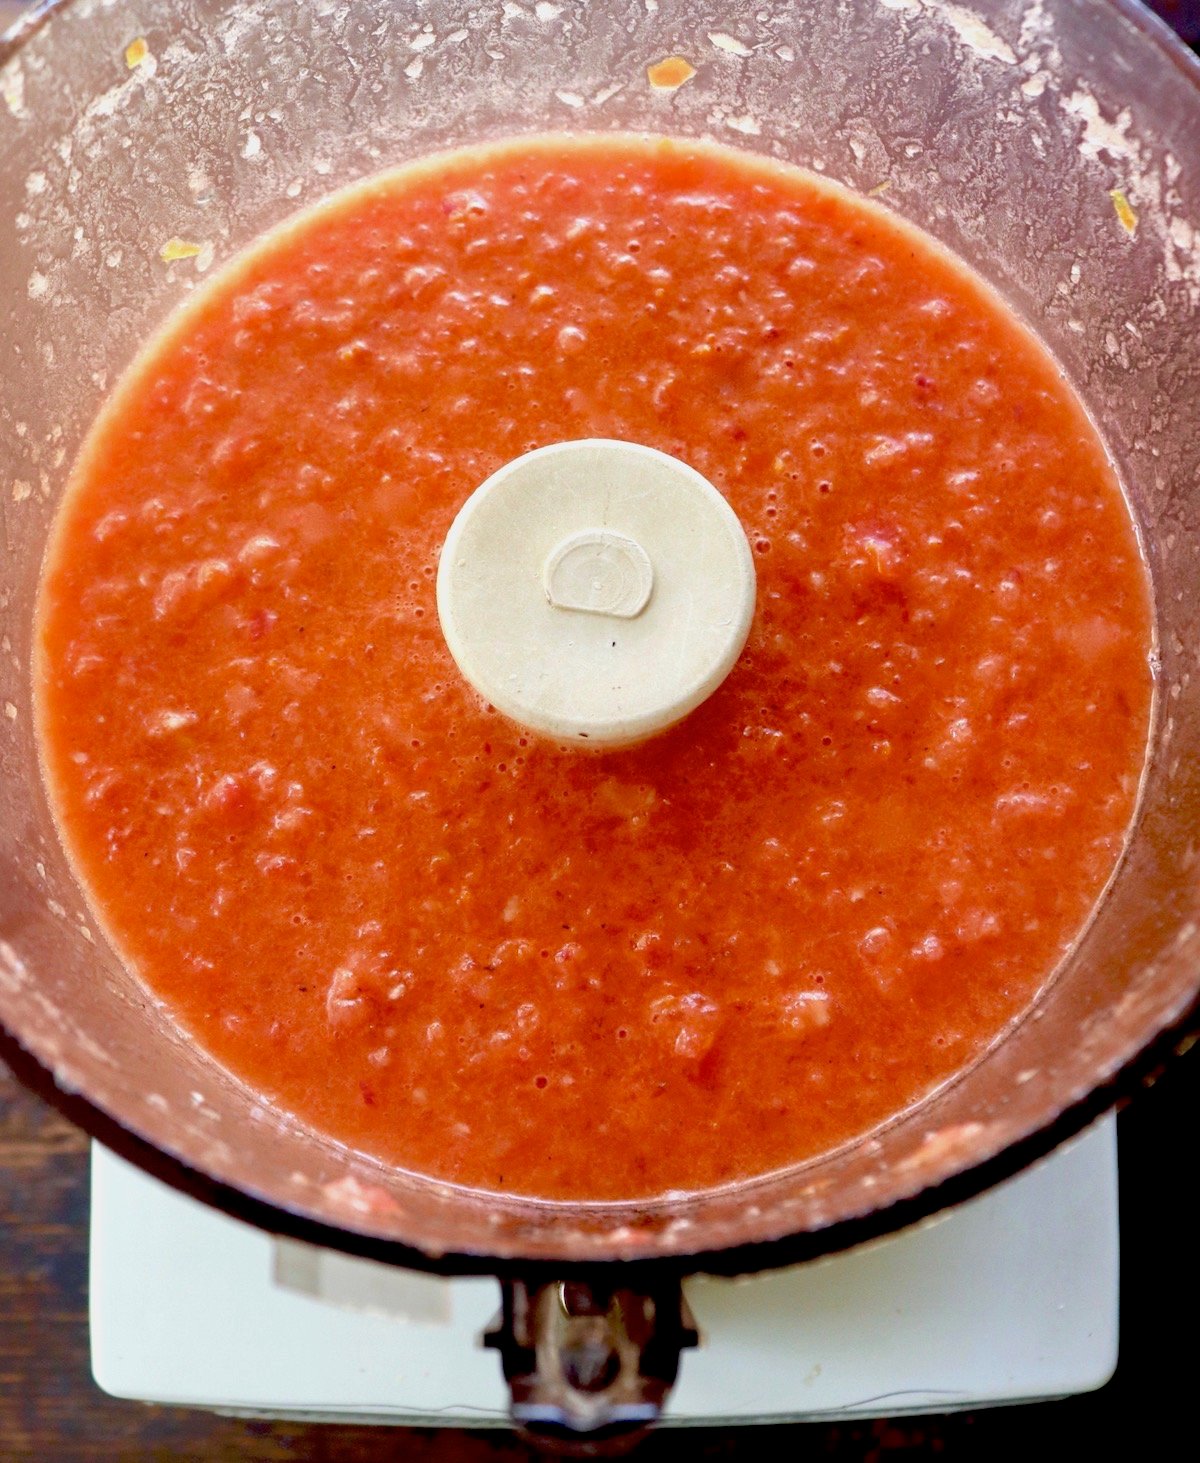 Food processor bowl filled with red tomato gazpacho.